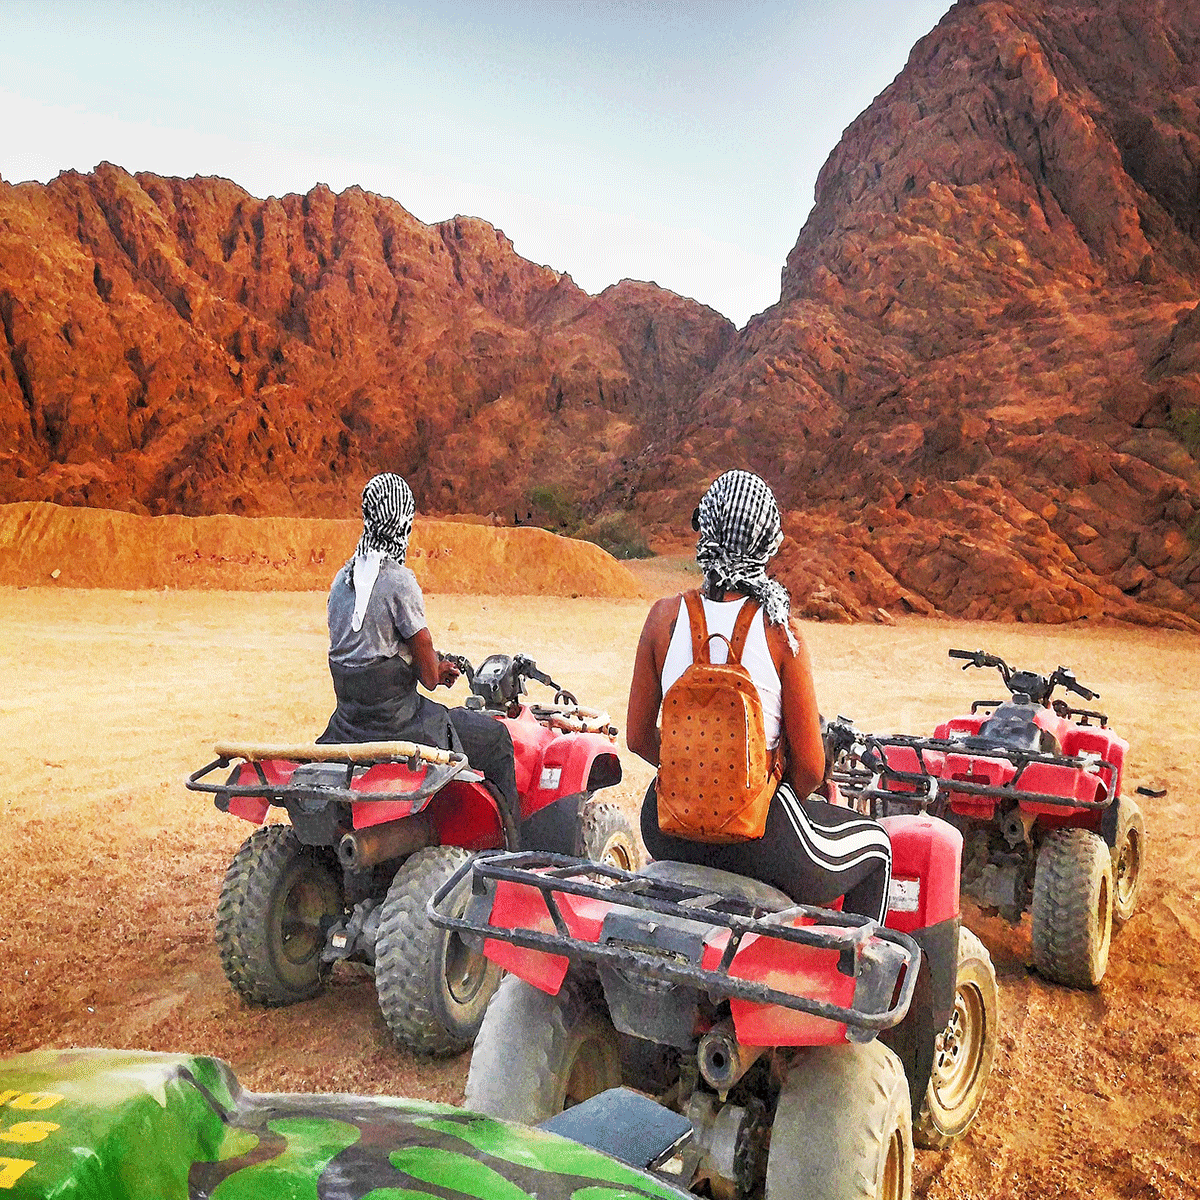 Welcome to Explore the Desert Landscapes on a Thrilling Quad Bike Adventure